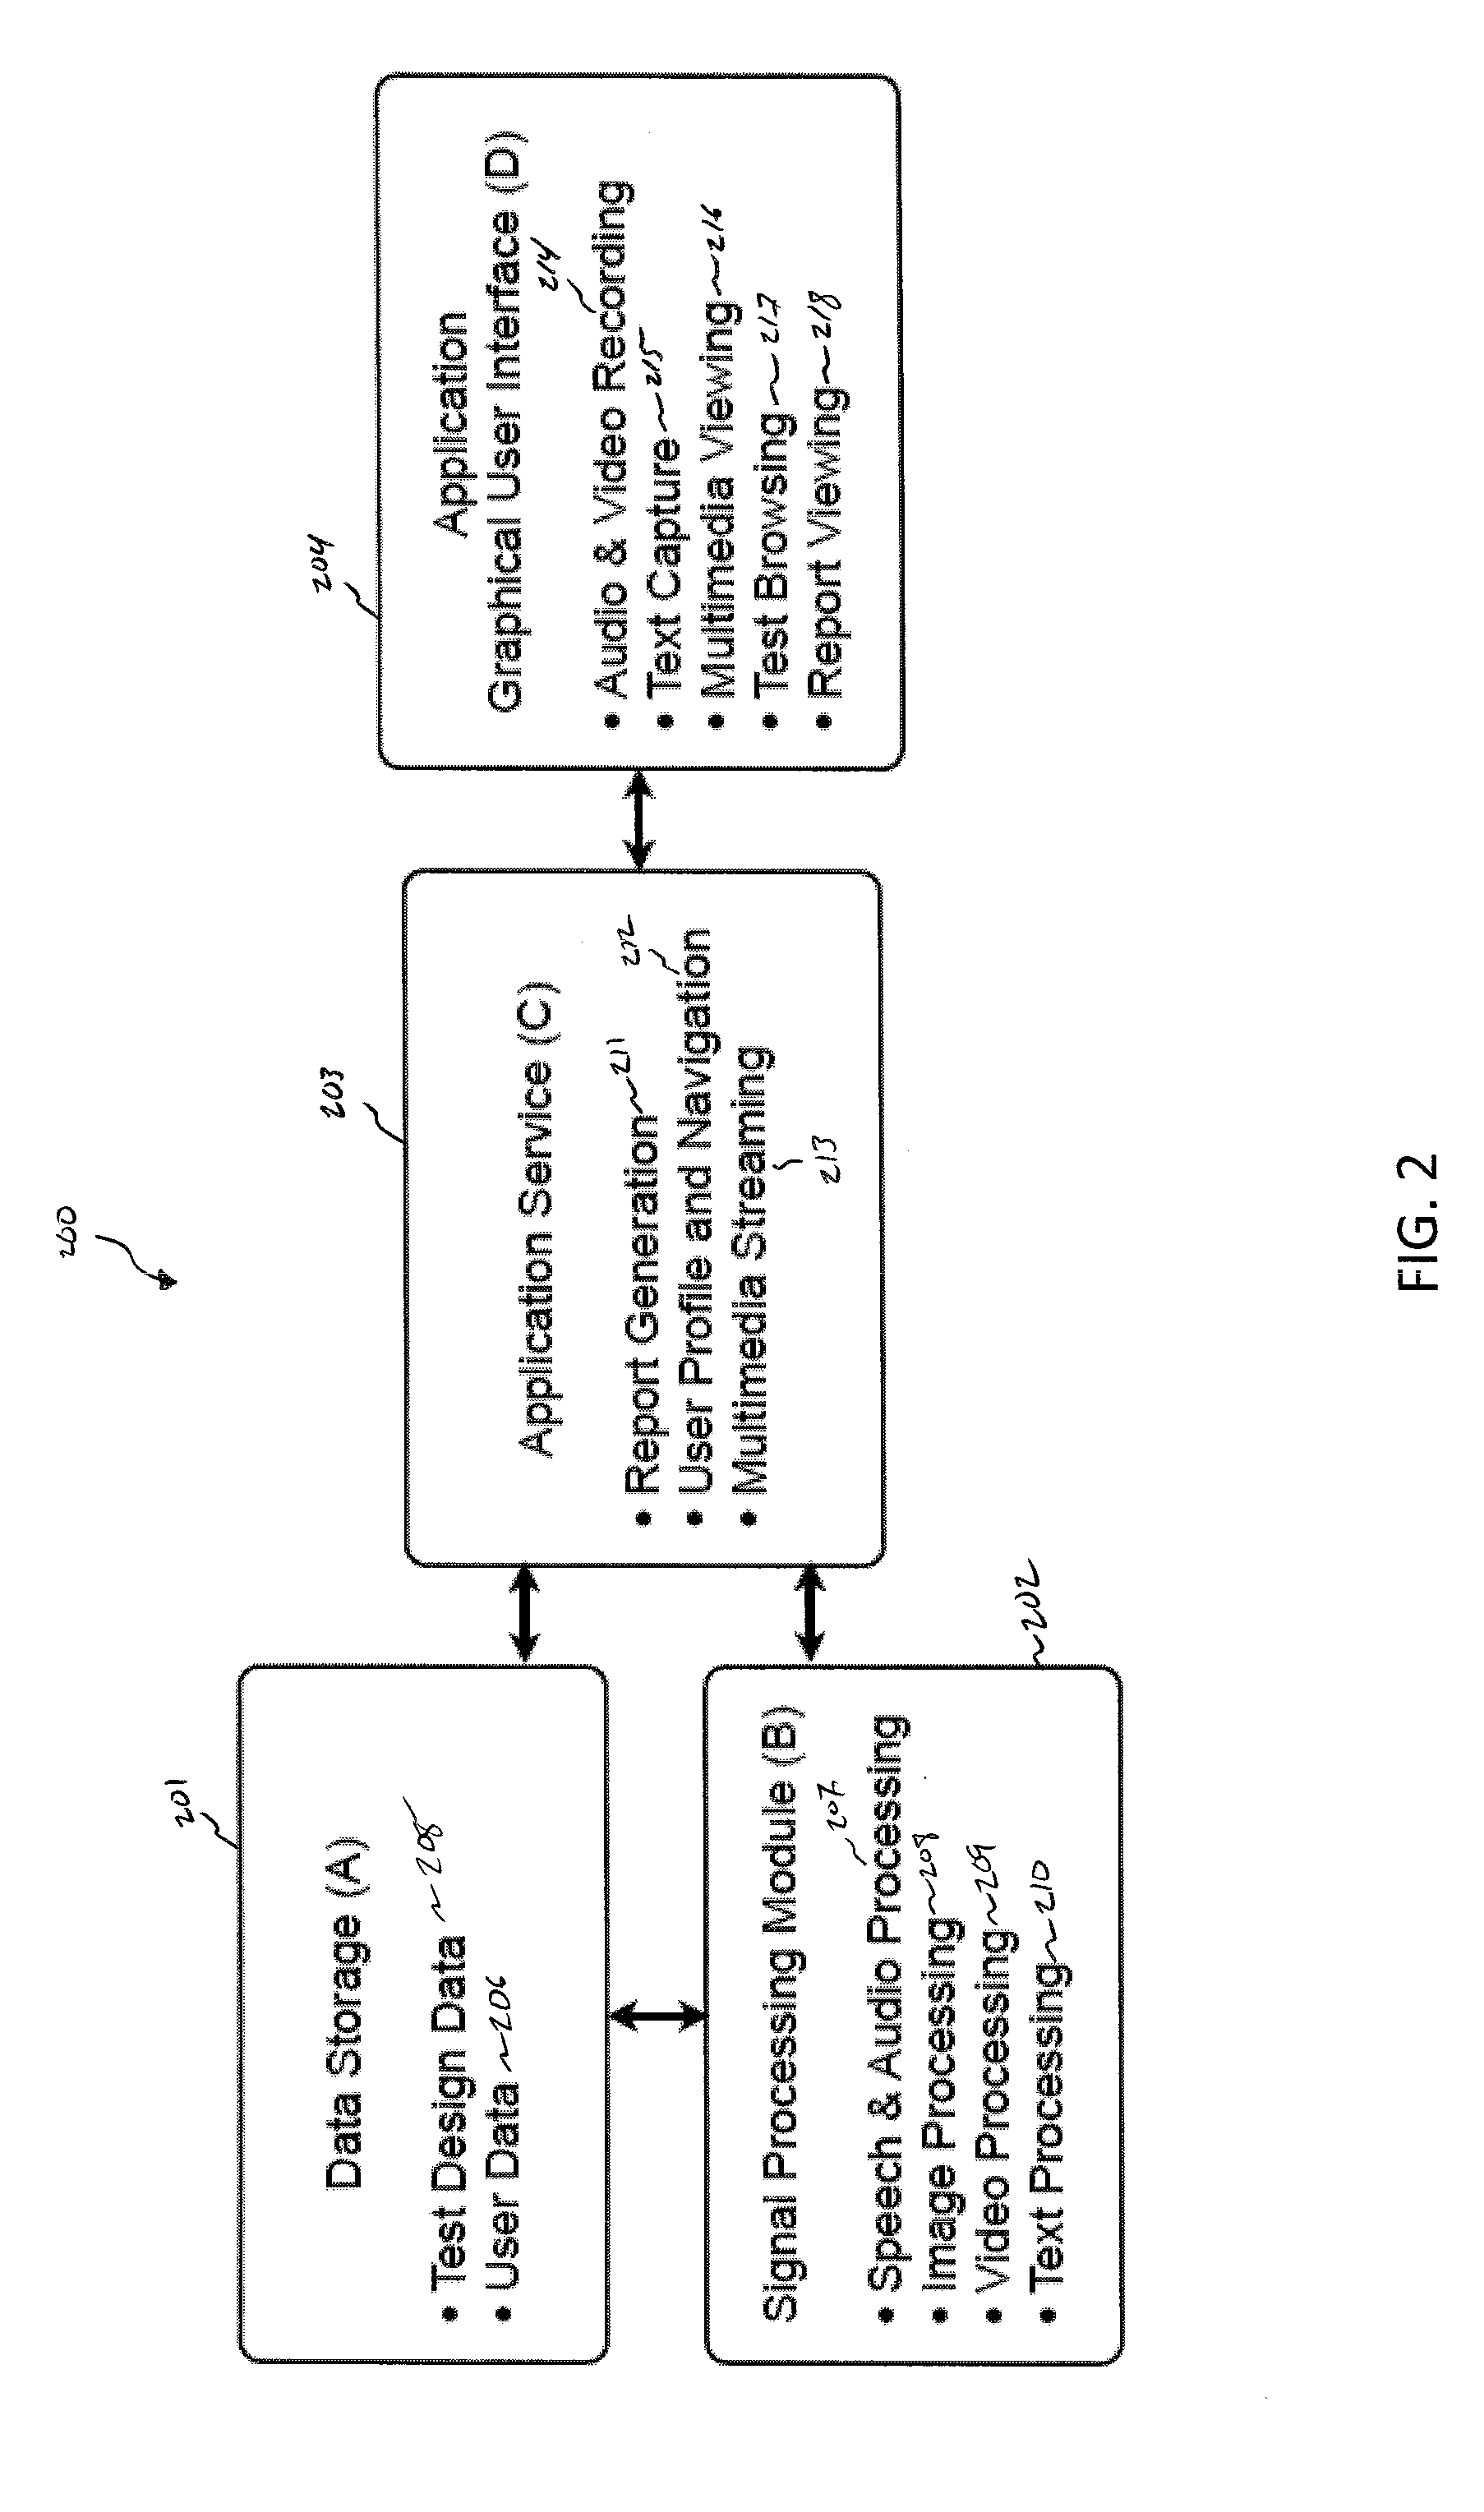 System and method for interactive electronic learning and assessment